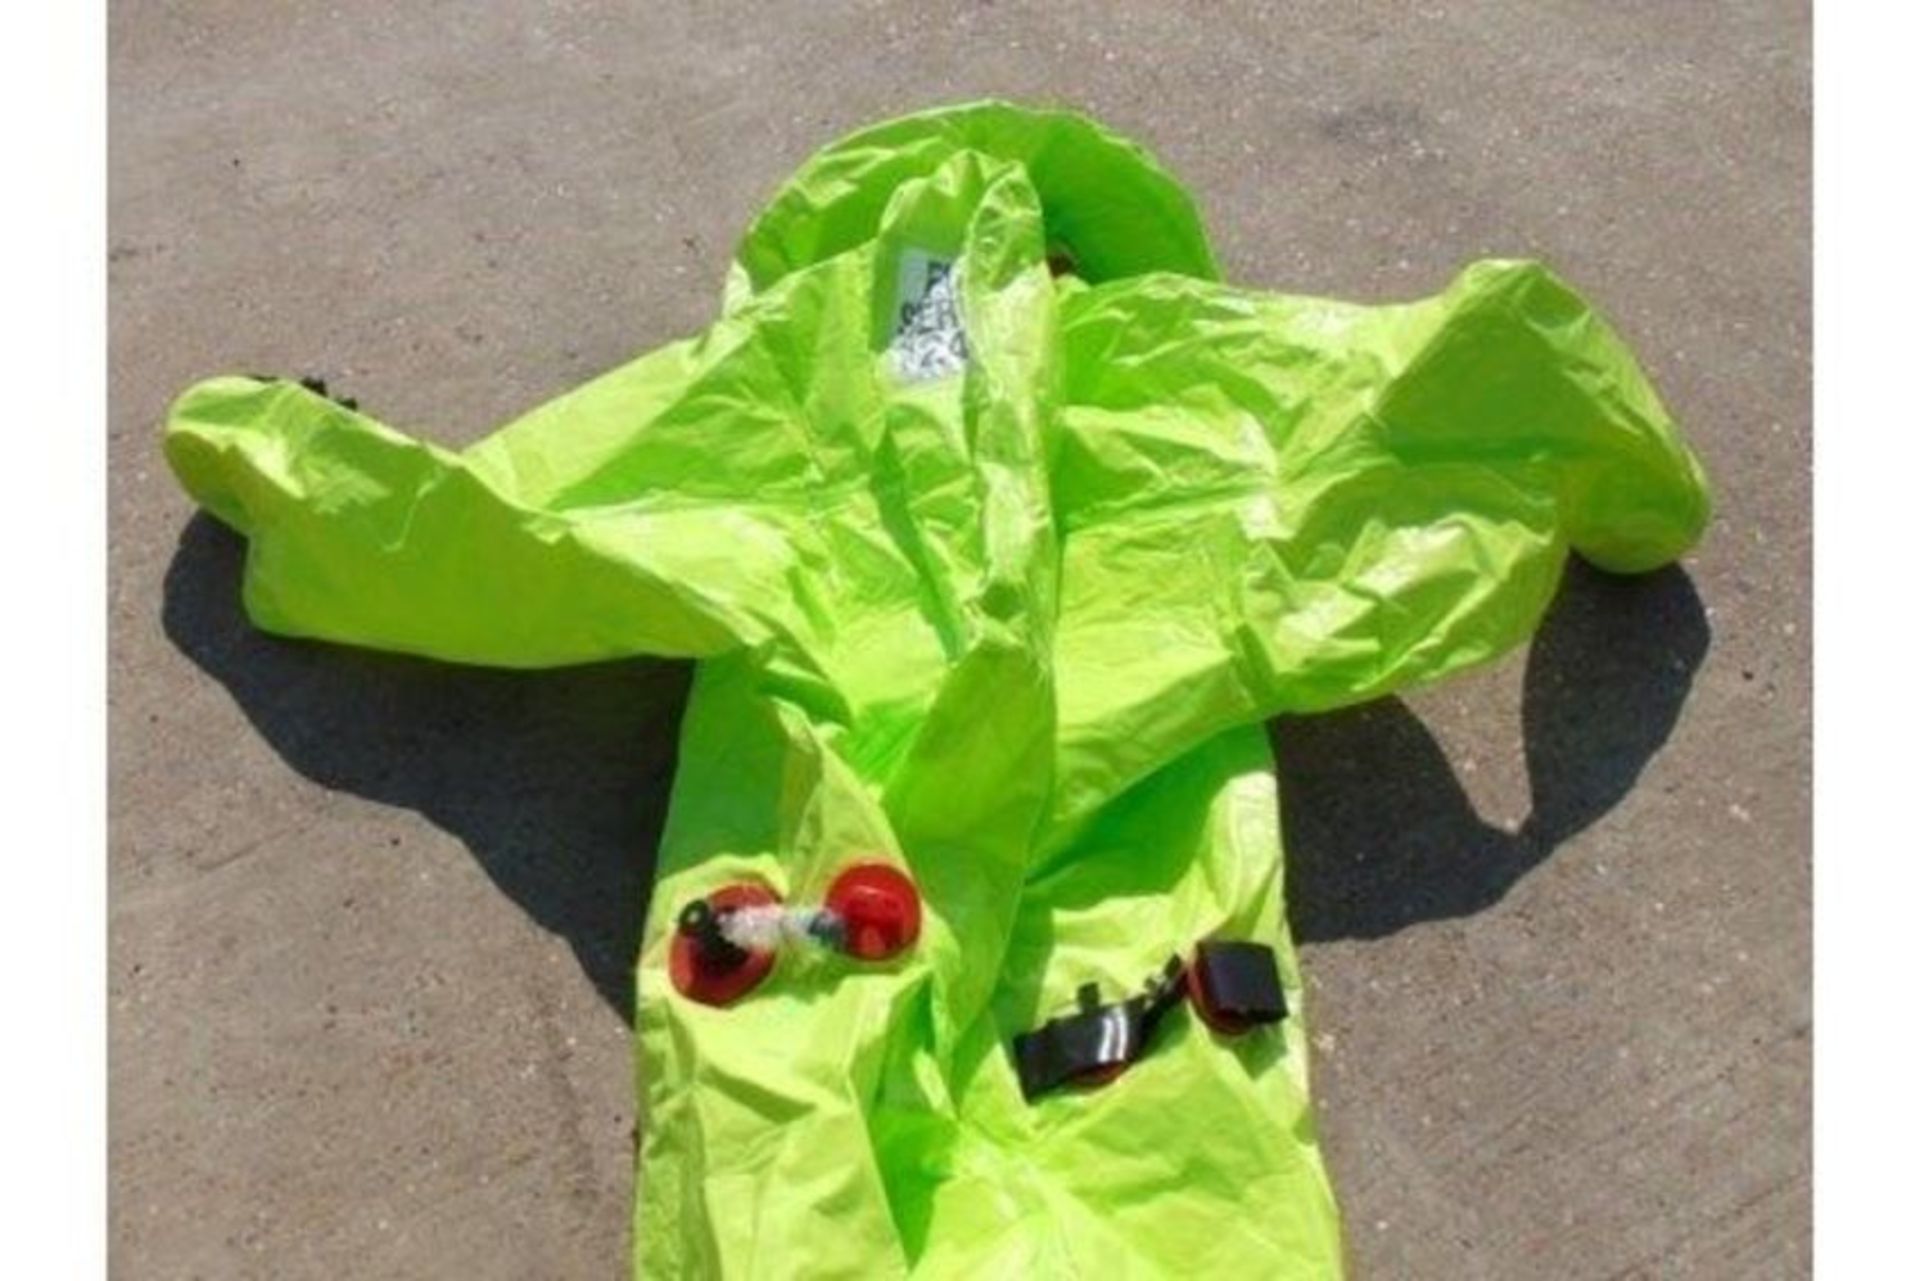 10 x Respirex Tychem TK Gas-Tight Hazmat Suit Type 1A with Attached Boots and Gloves - Image 7 of 10